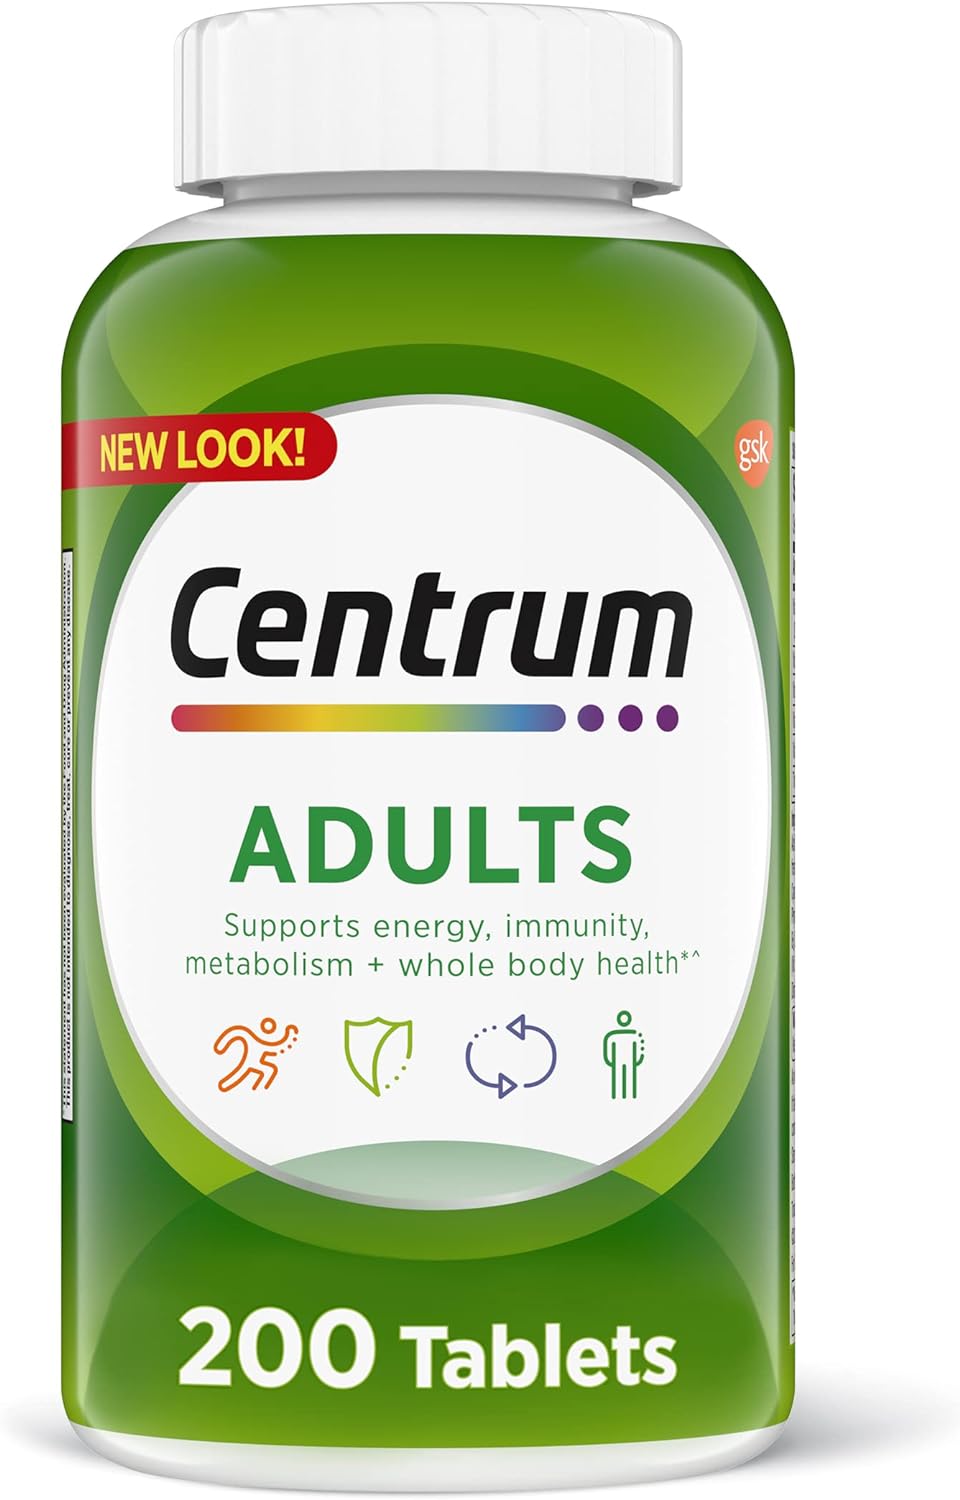 Centrum Adult Multivitamin/Multimineral Supplement with Antioxidants, Zinc and B Vitamins - 200 Count